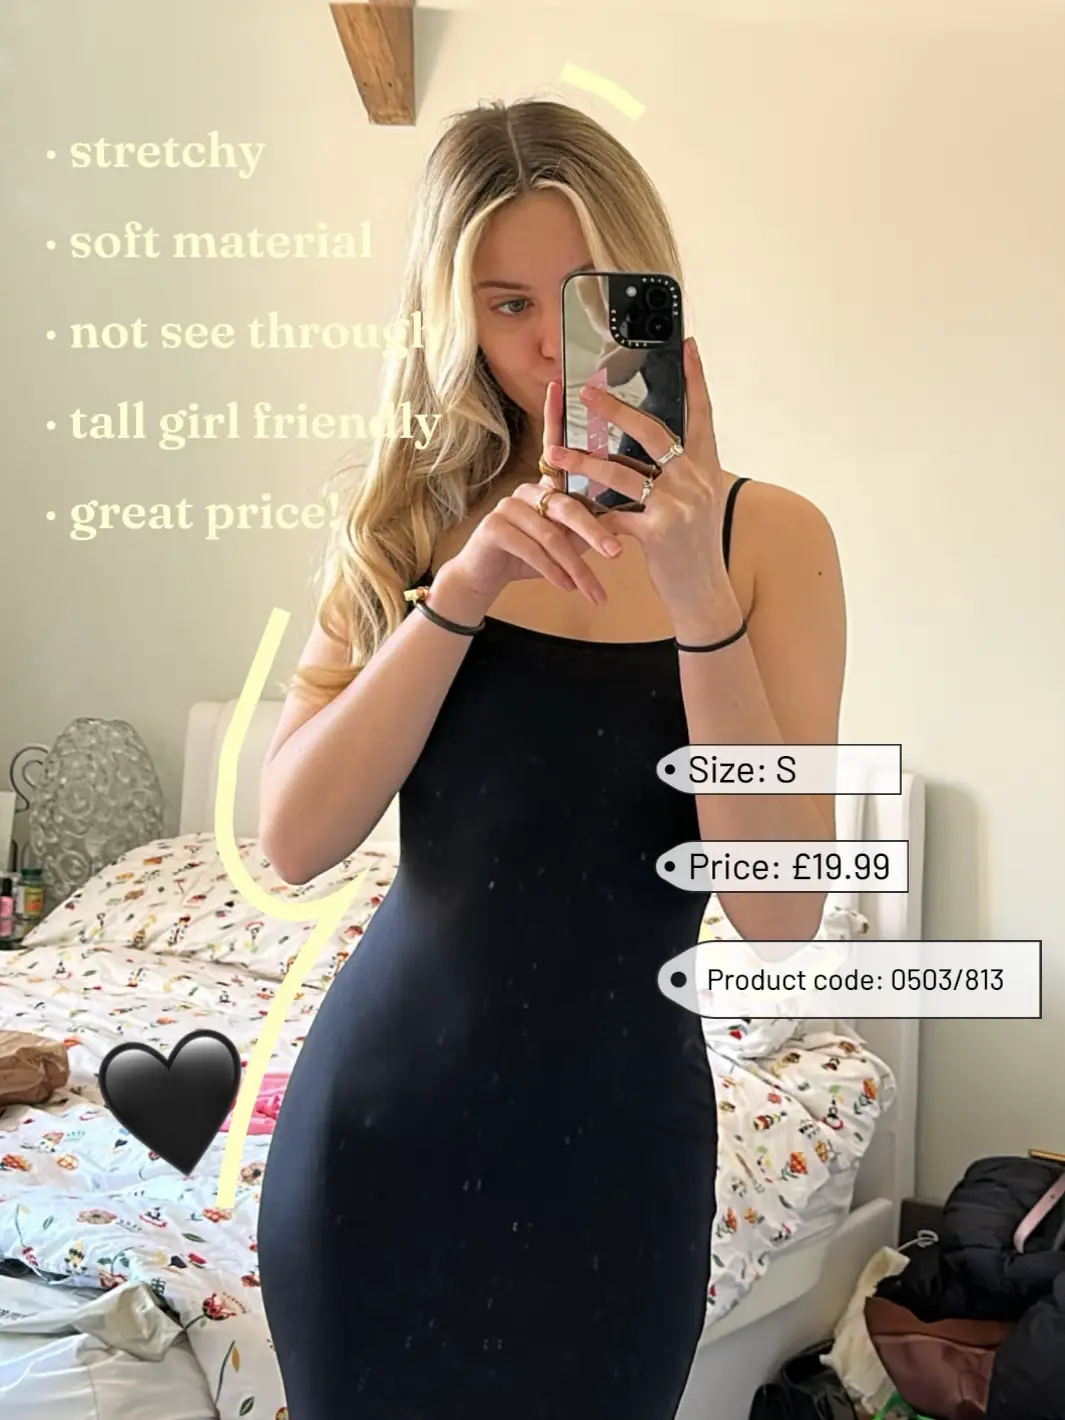 I tried the viral Bershka dress and it's identical to Skims - but it's £56